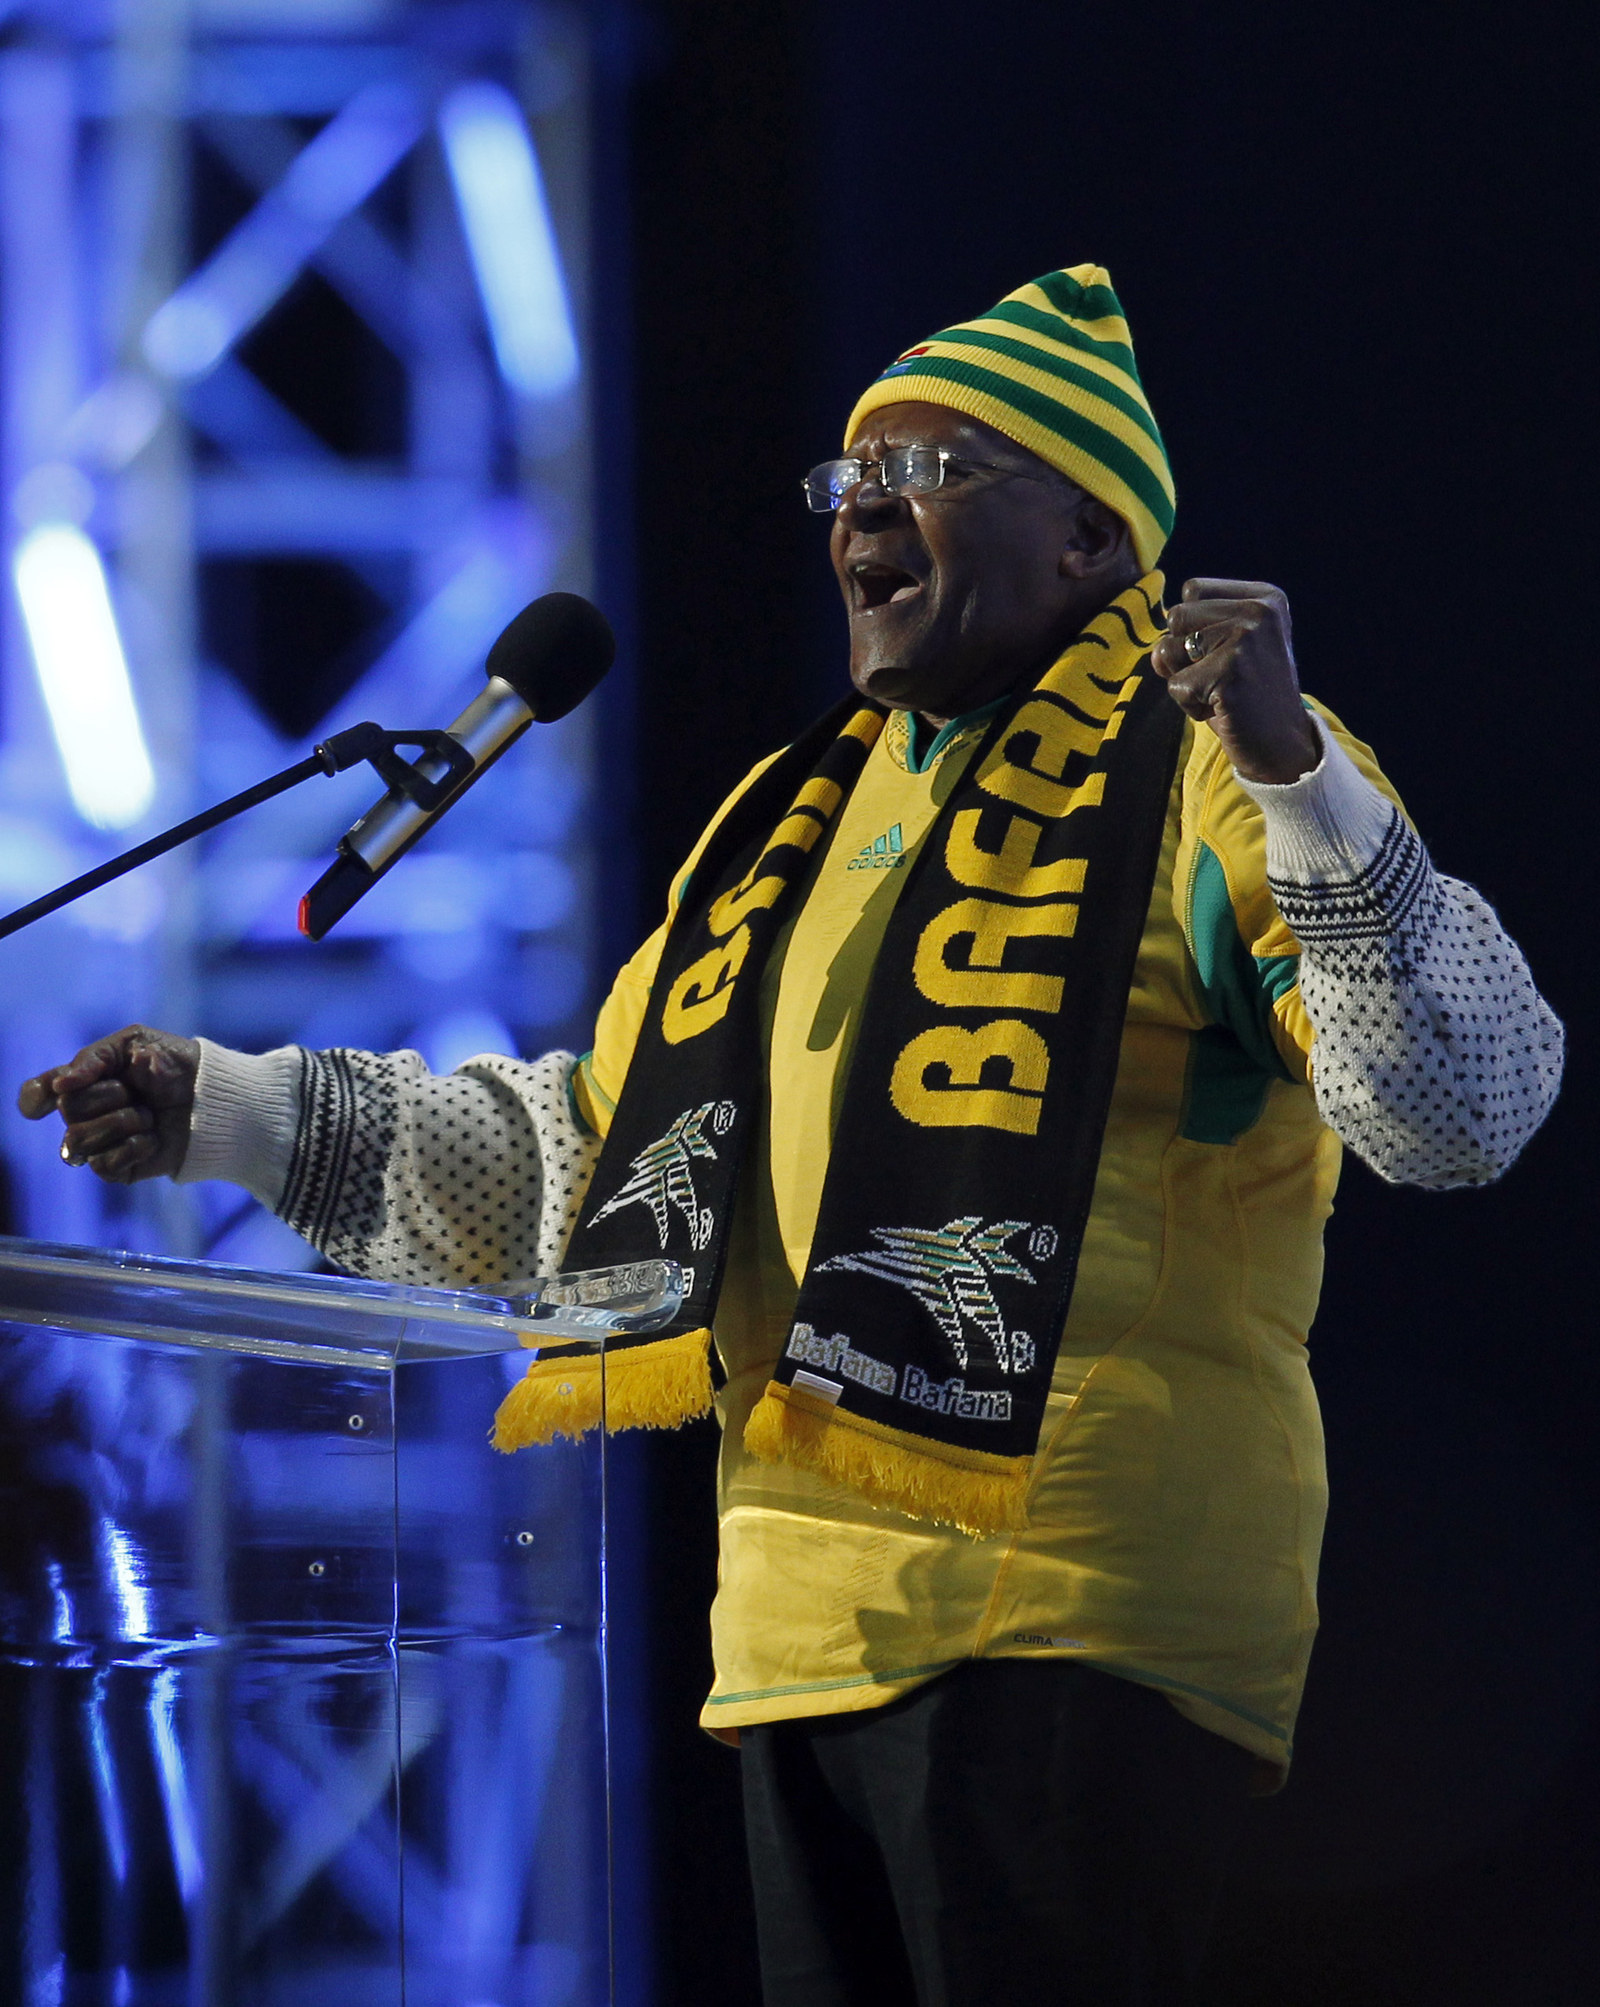 Tutu standing at a podium wearing a World Cup scarf around his neck and with his fist raised